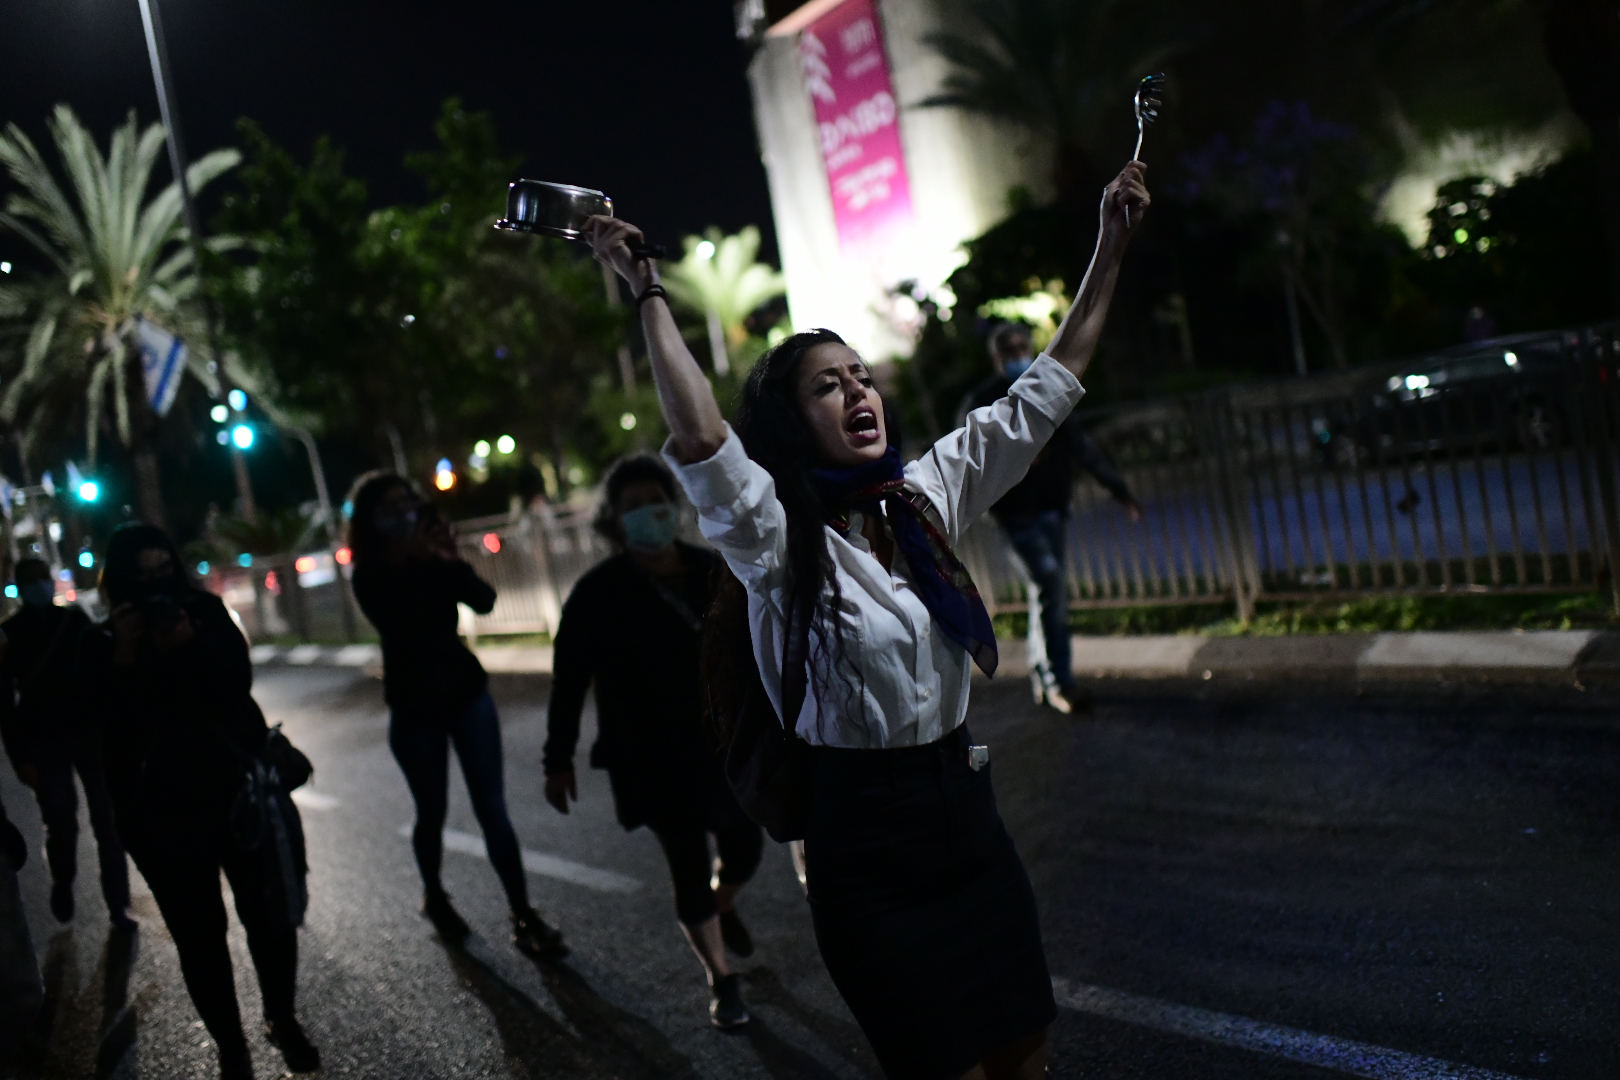 Israelis protest gender-based violence following the killing of a 50-year-old woman by her husband, Bat Yam, May 4, 2020. (Tomer Neuberg/FLASH90)